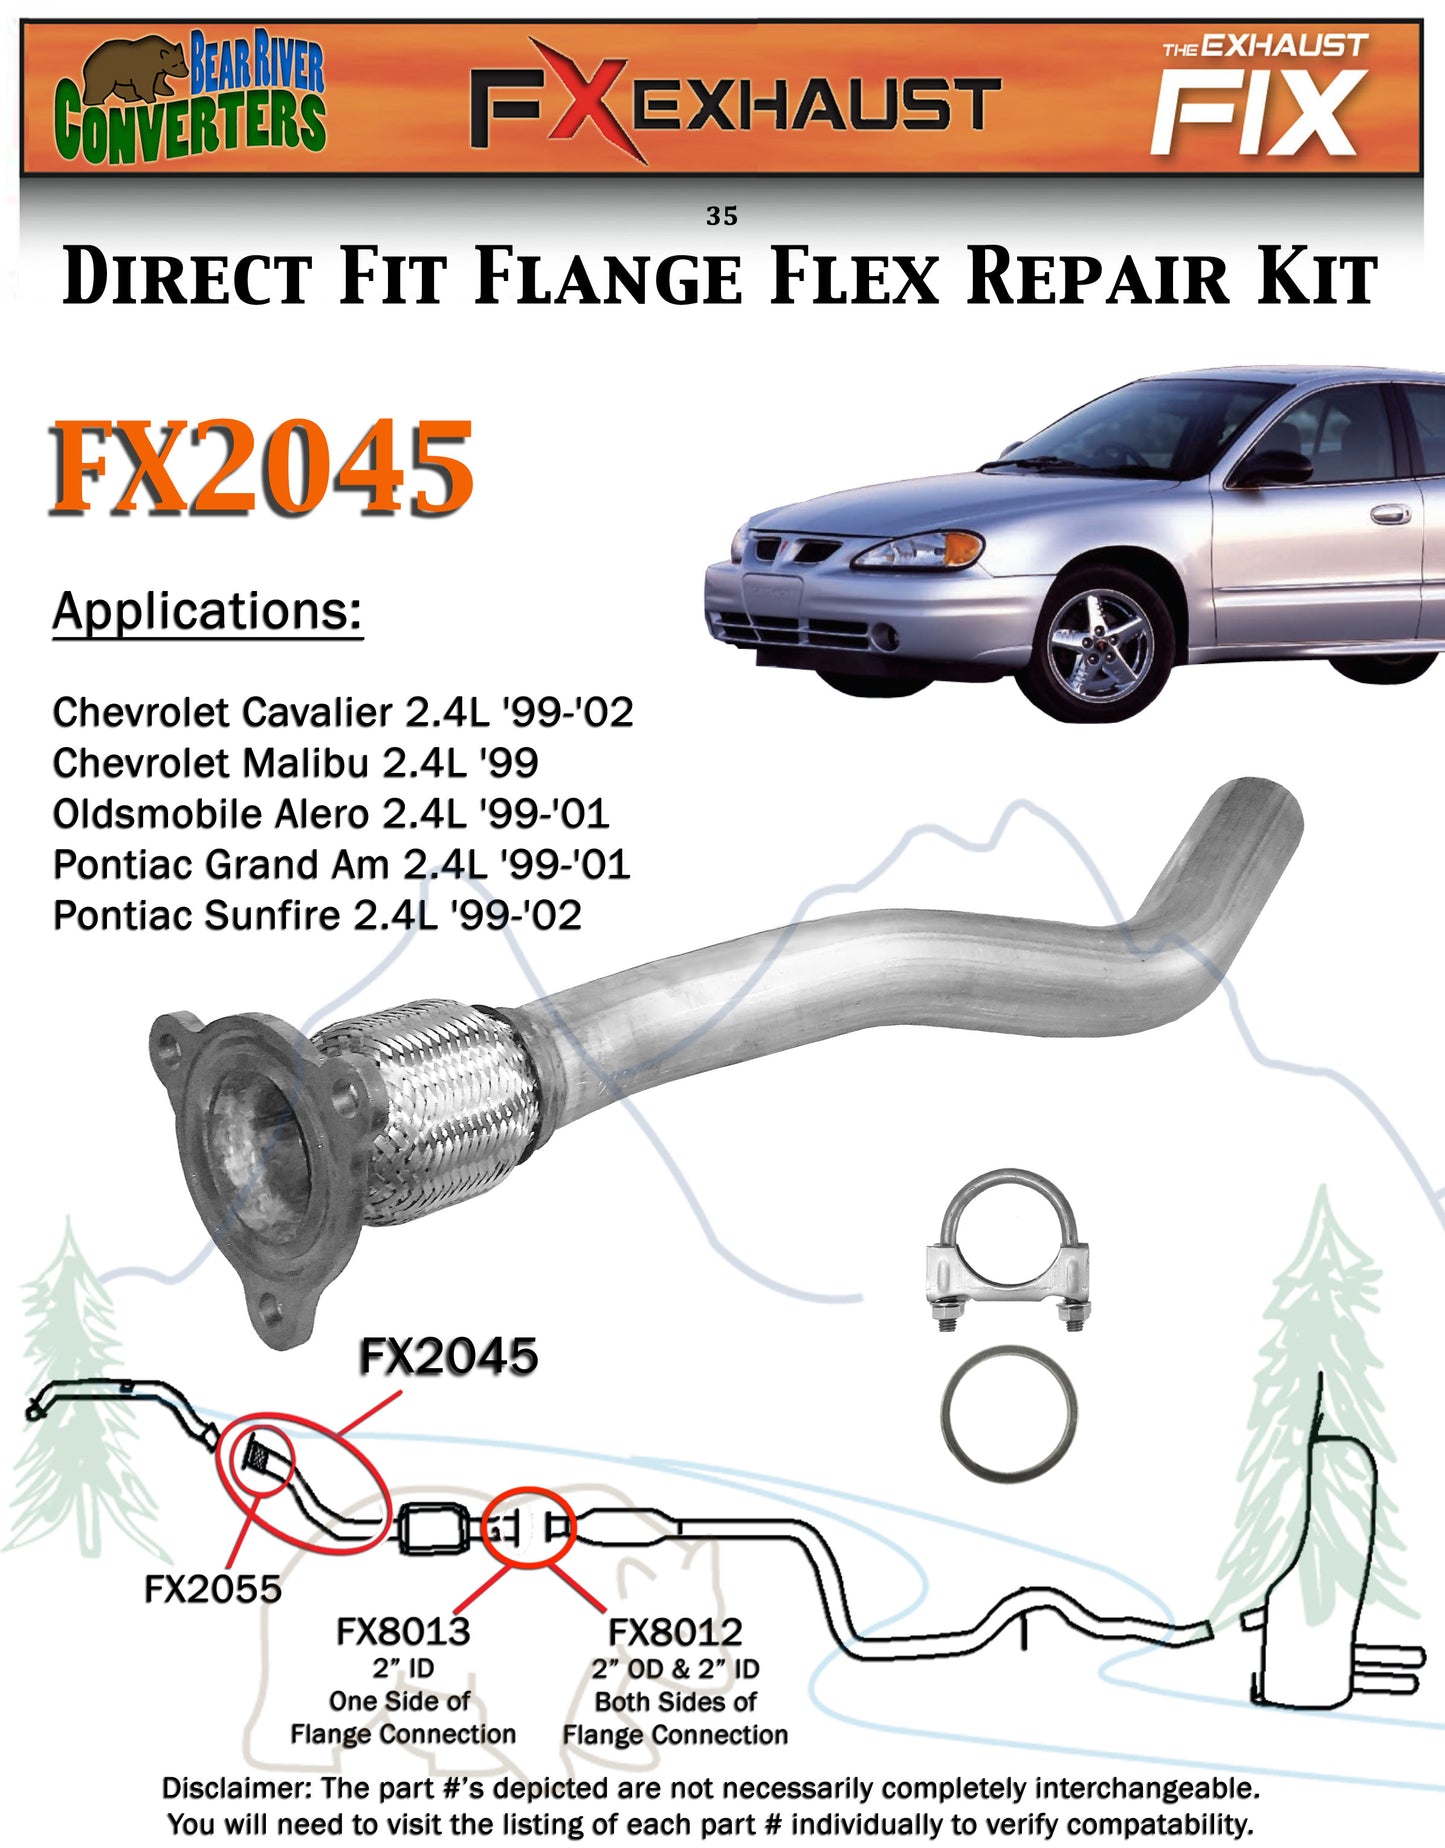 FX2045 Semi Direct Fit Exhaust Flange Repair Flex Pipe Replacement Kit With Gasket